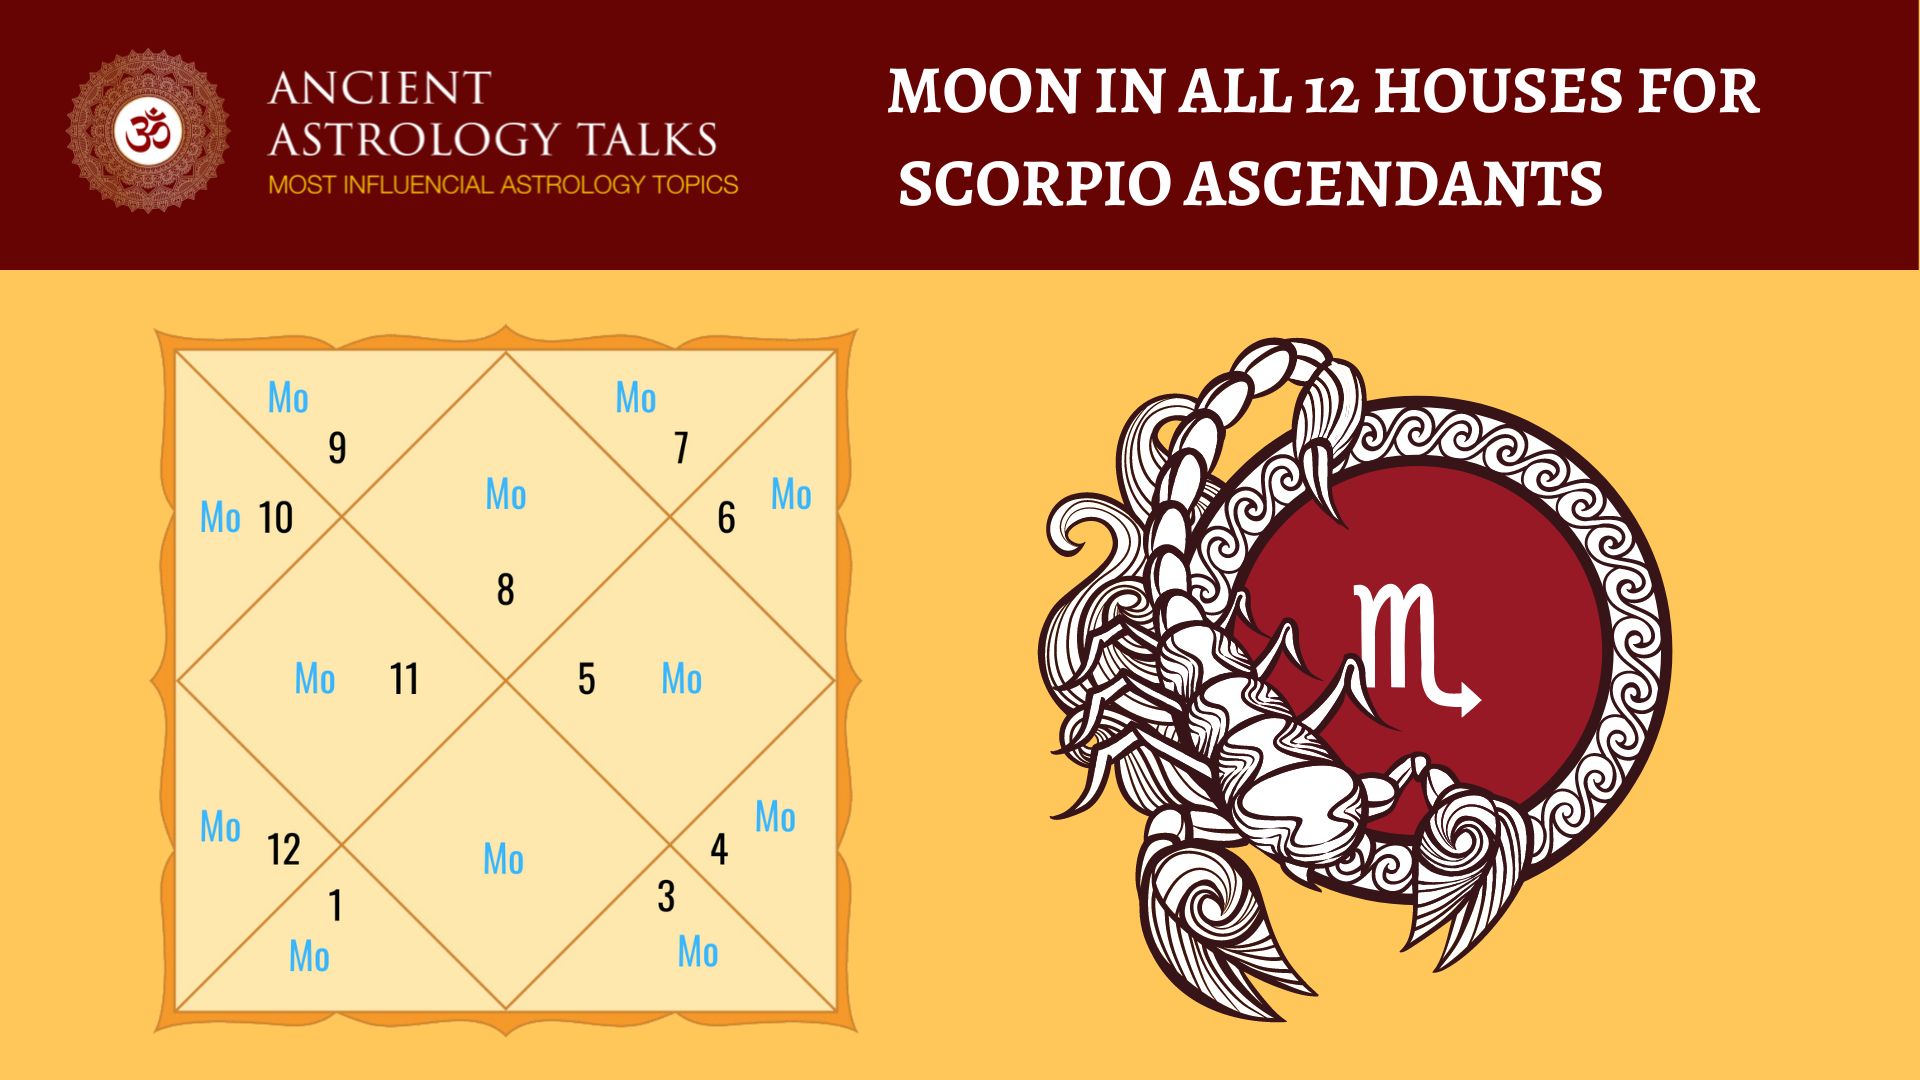 Moon in All 12 Houses for Scorpio Ascendants